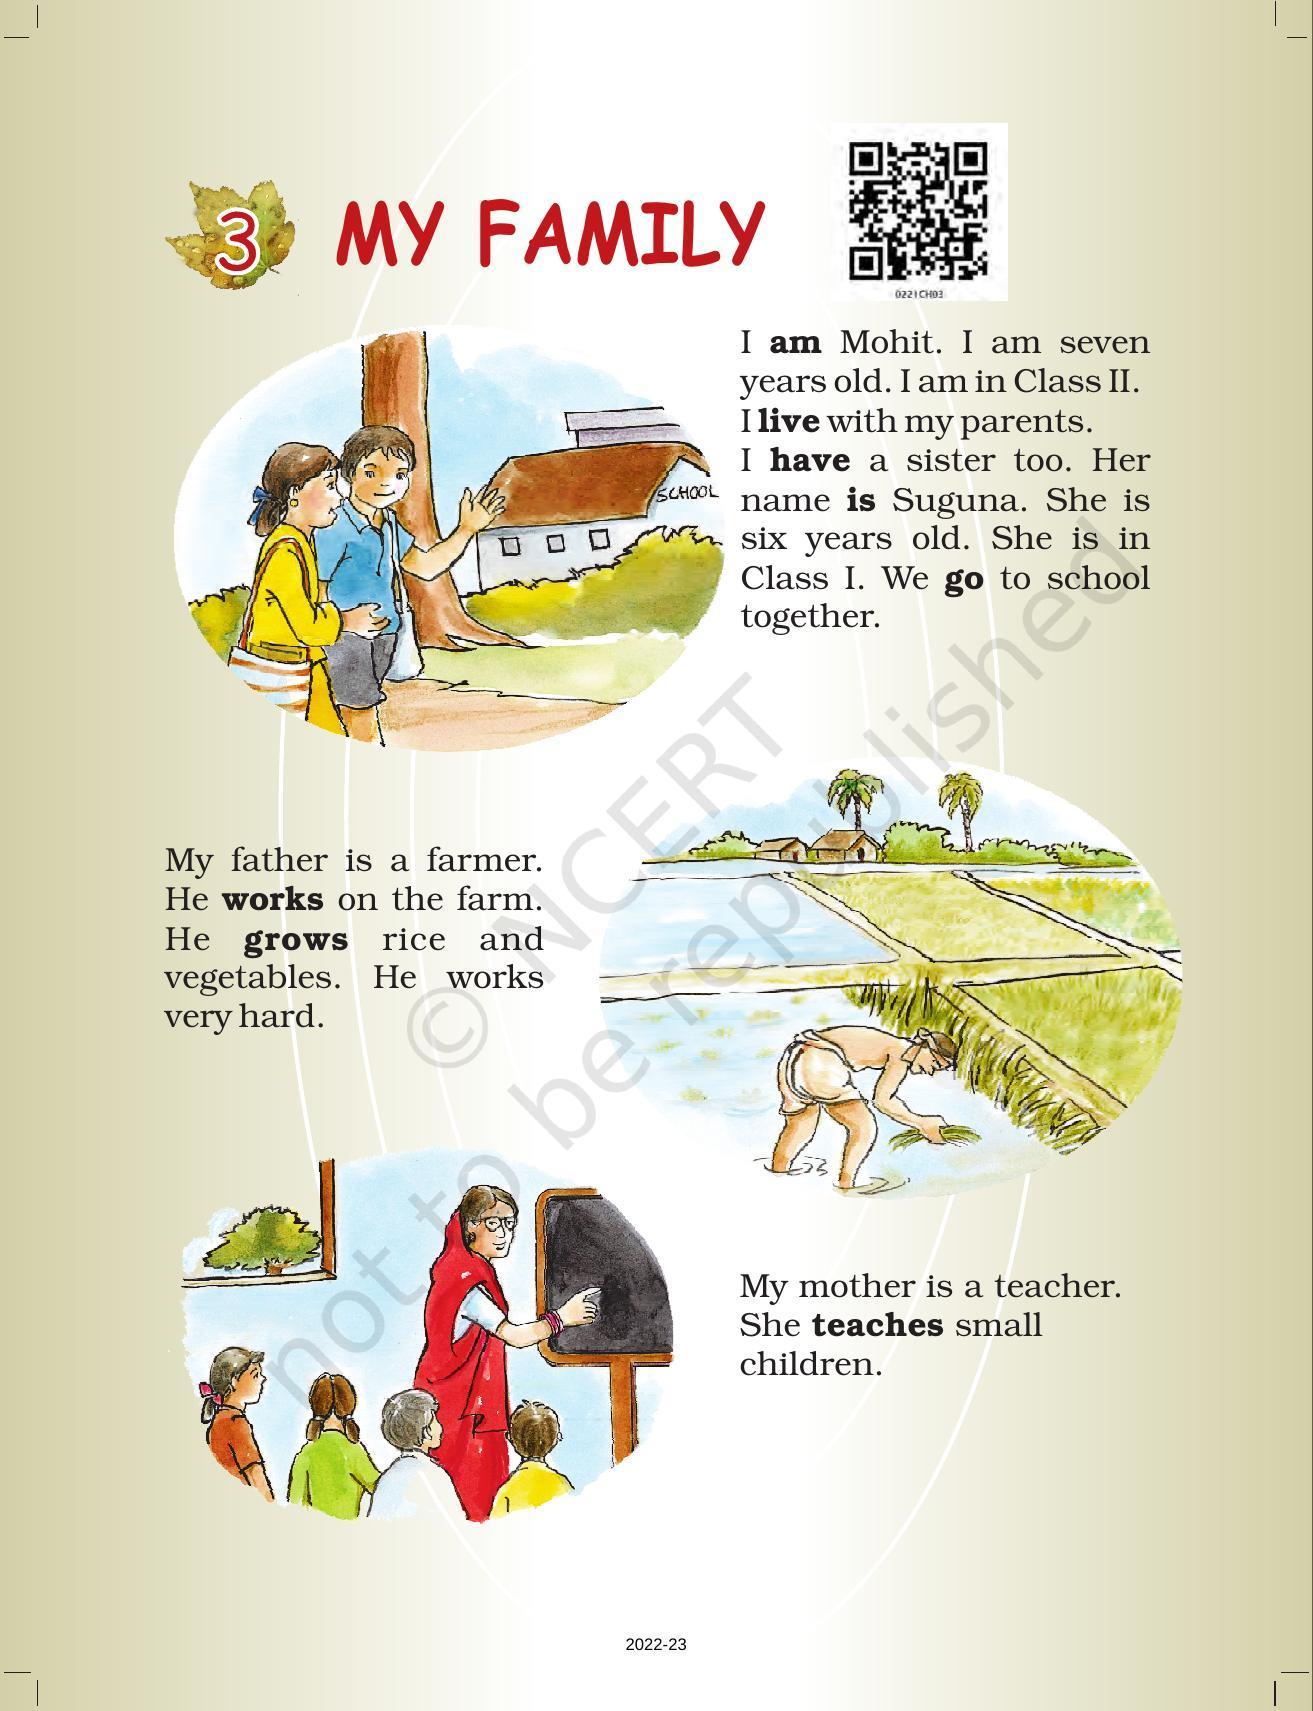 NCERT Book for Class 2 English (Raindrops):Chapter 3-My Family - Page 1